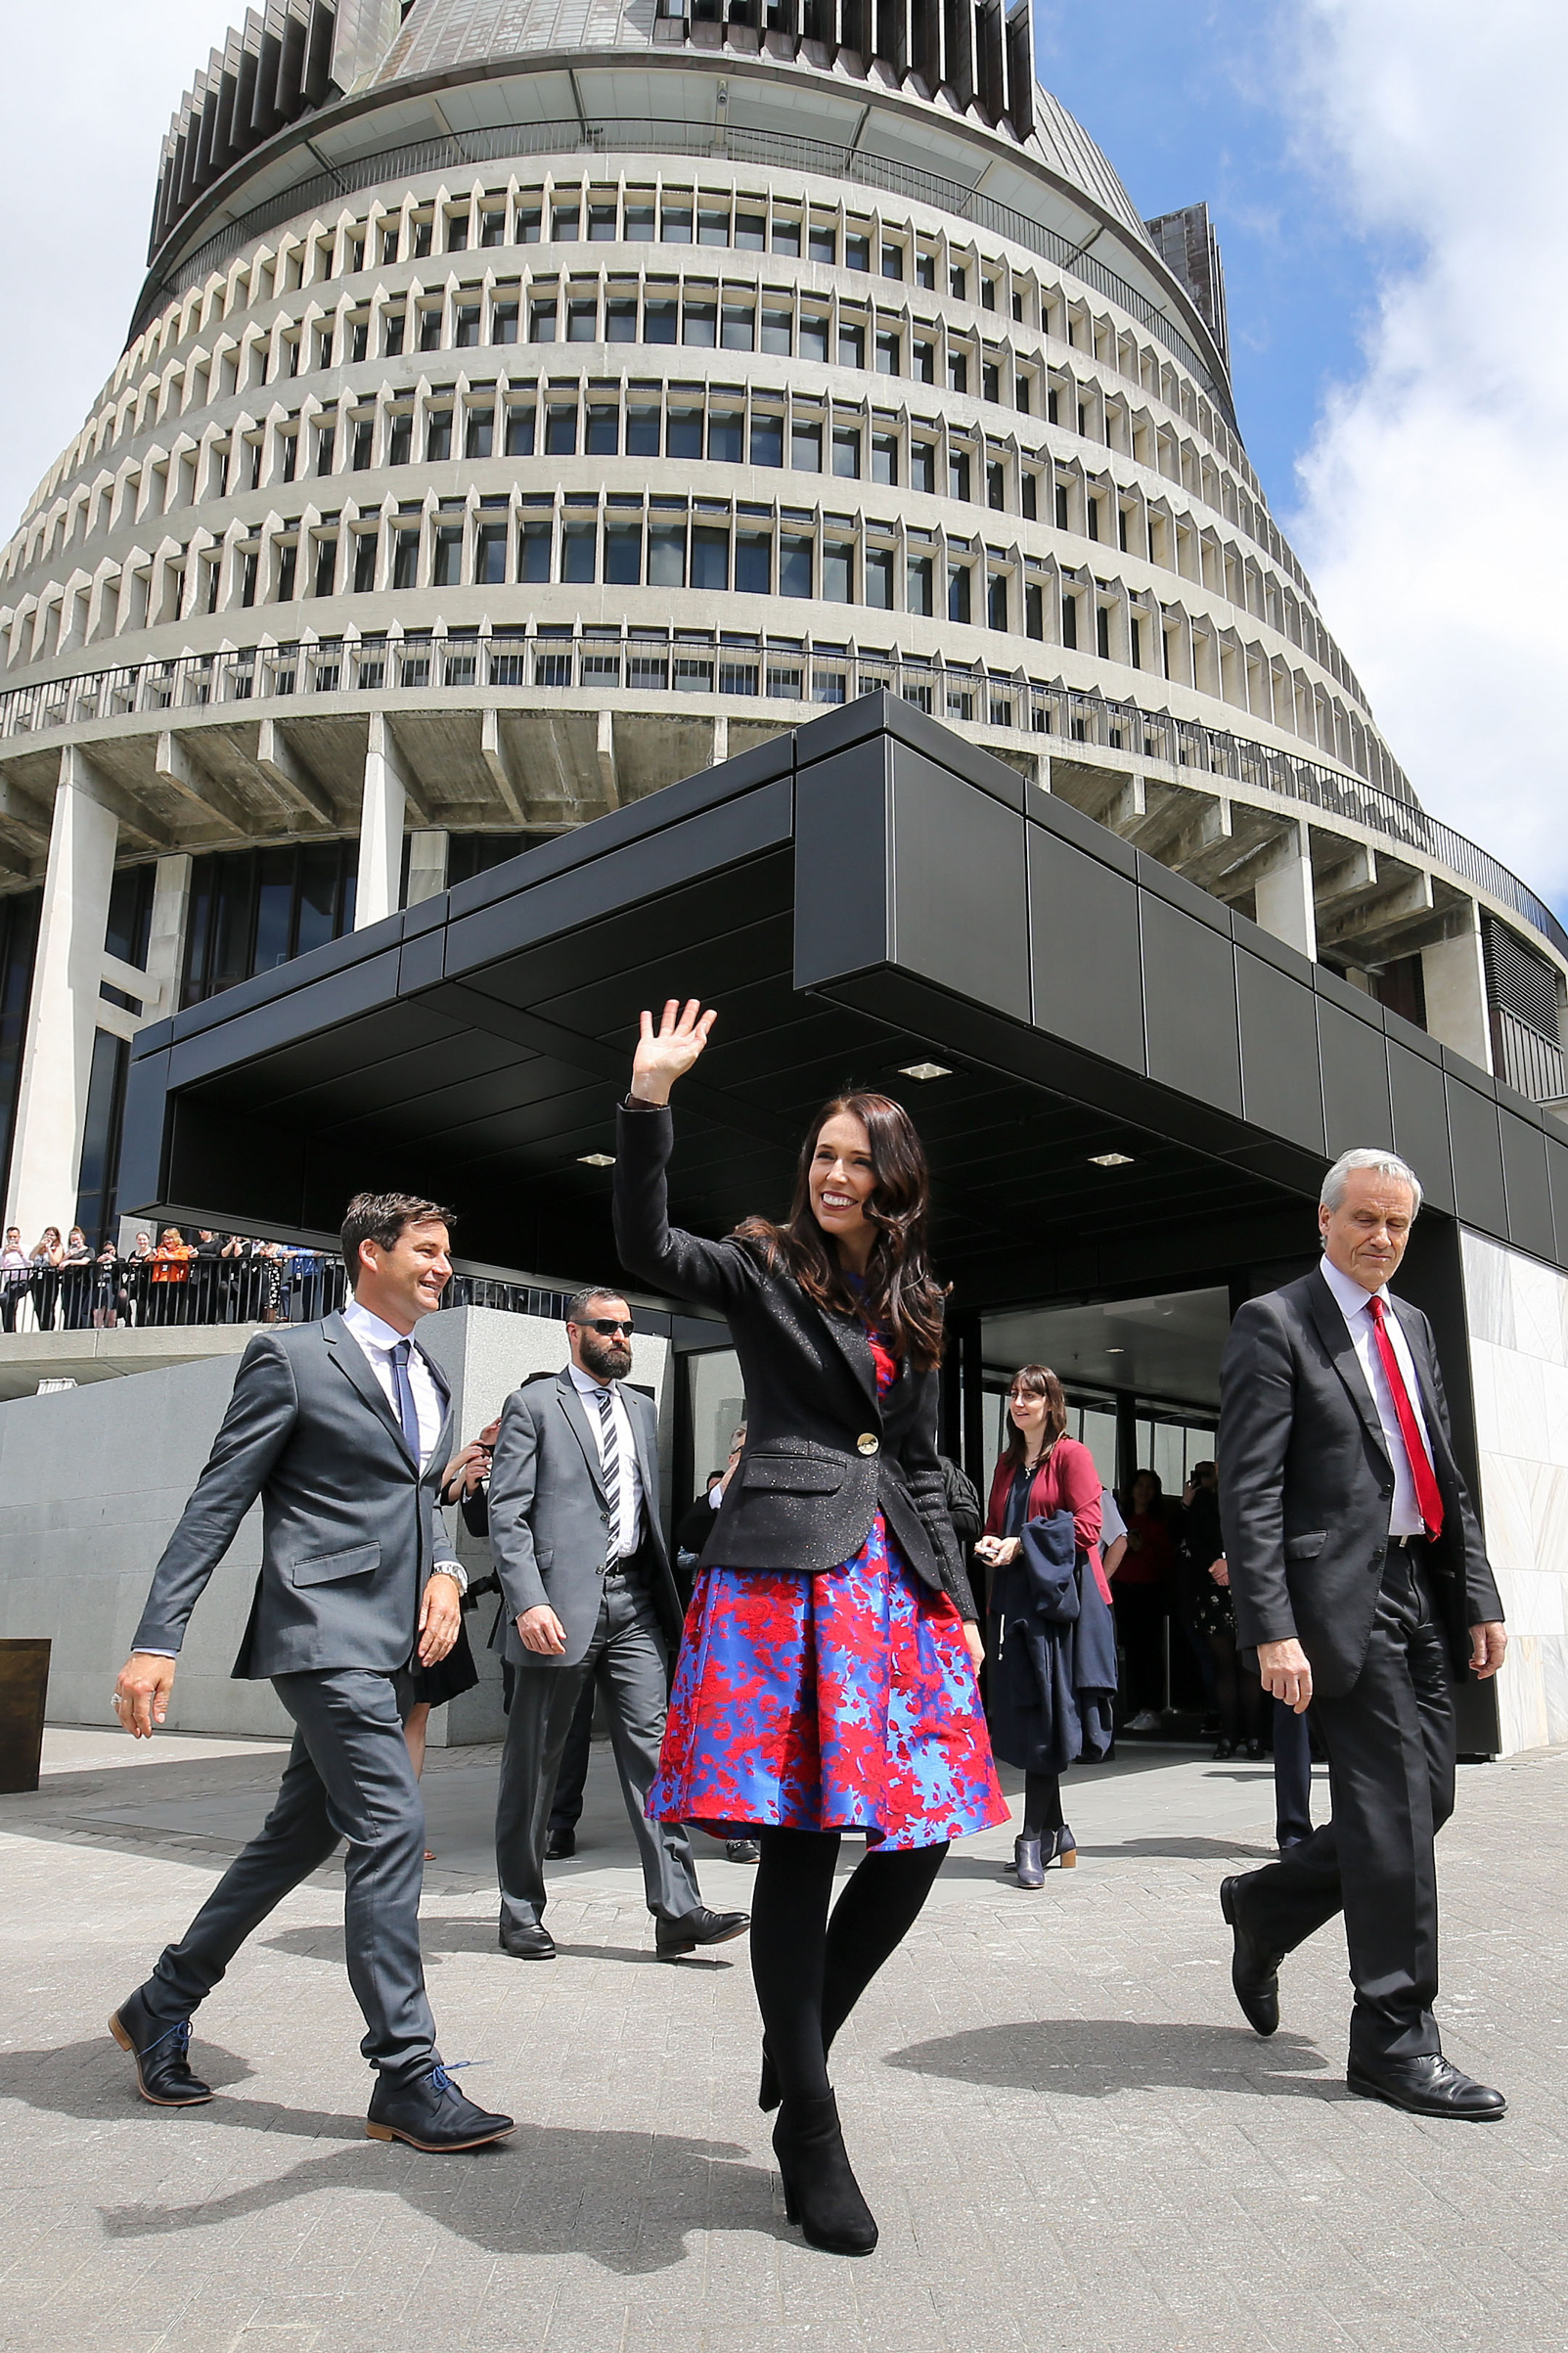 Prime Minister Jacinda Ardern and partner Clarke Gayford arrive at Parliament after a swearing-in ceremony at Government House in Wellington on Oct. 26, 2017. (Hagen Hopkins—Getty Images)